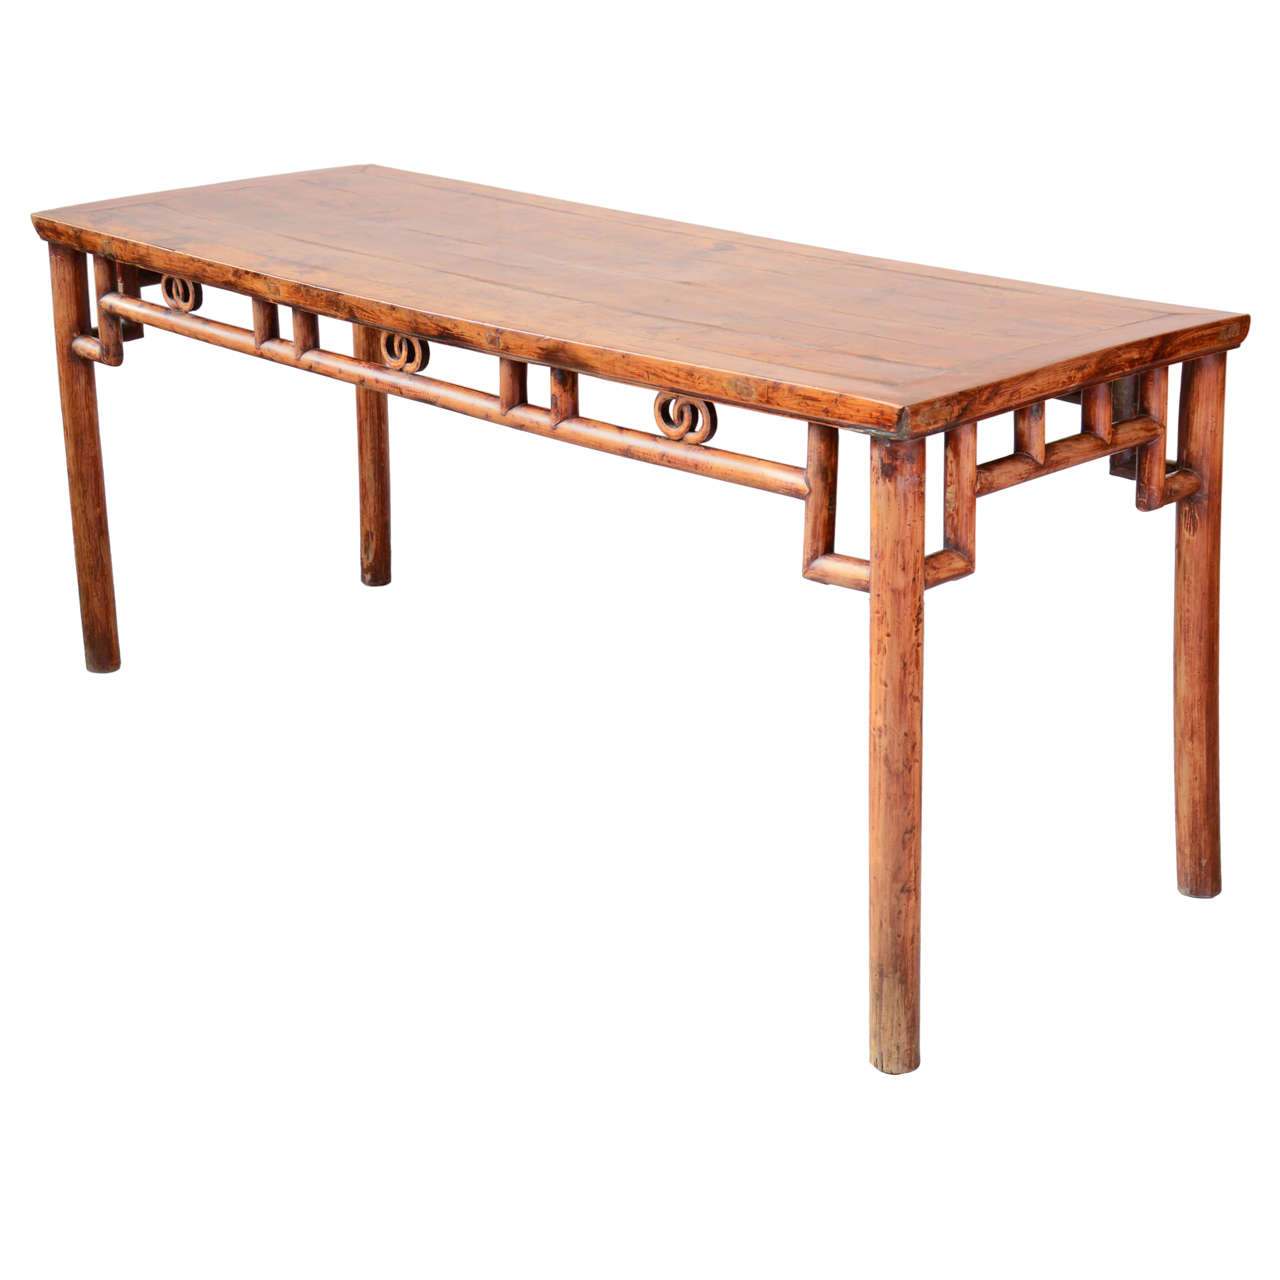 19th Century Chinese Painting Table In Cypress Wood